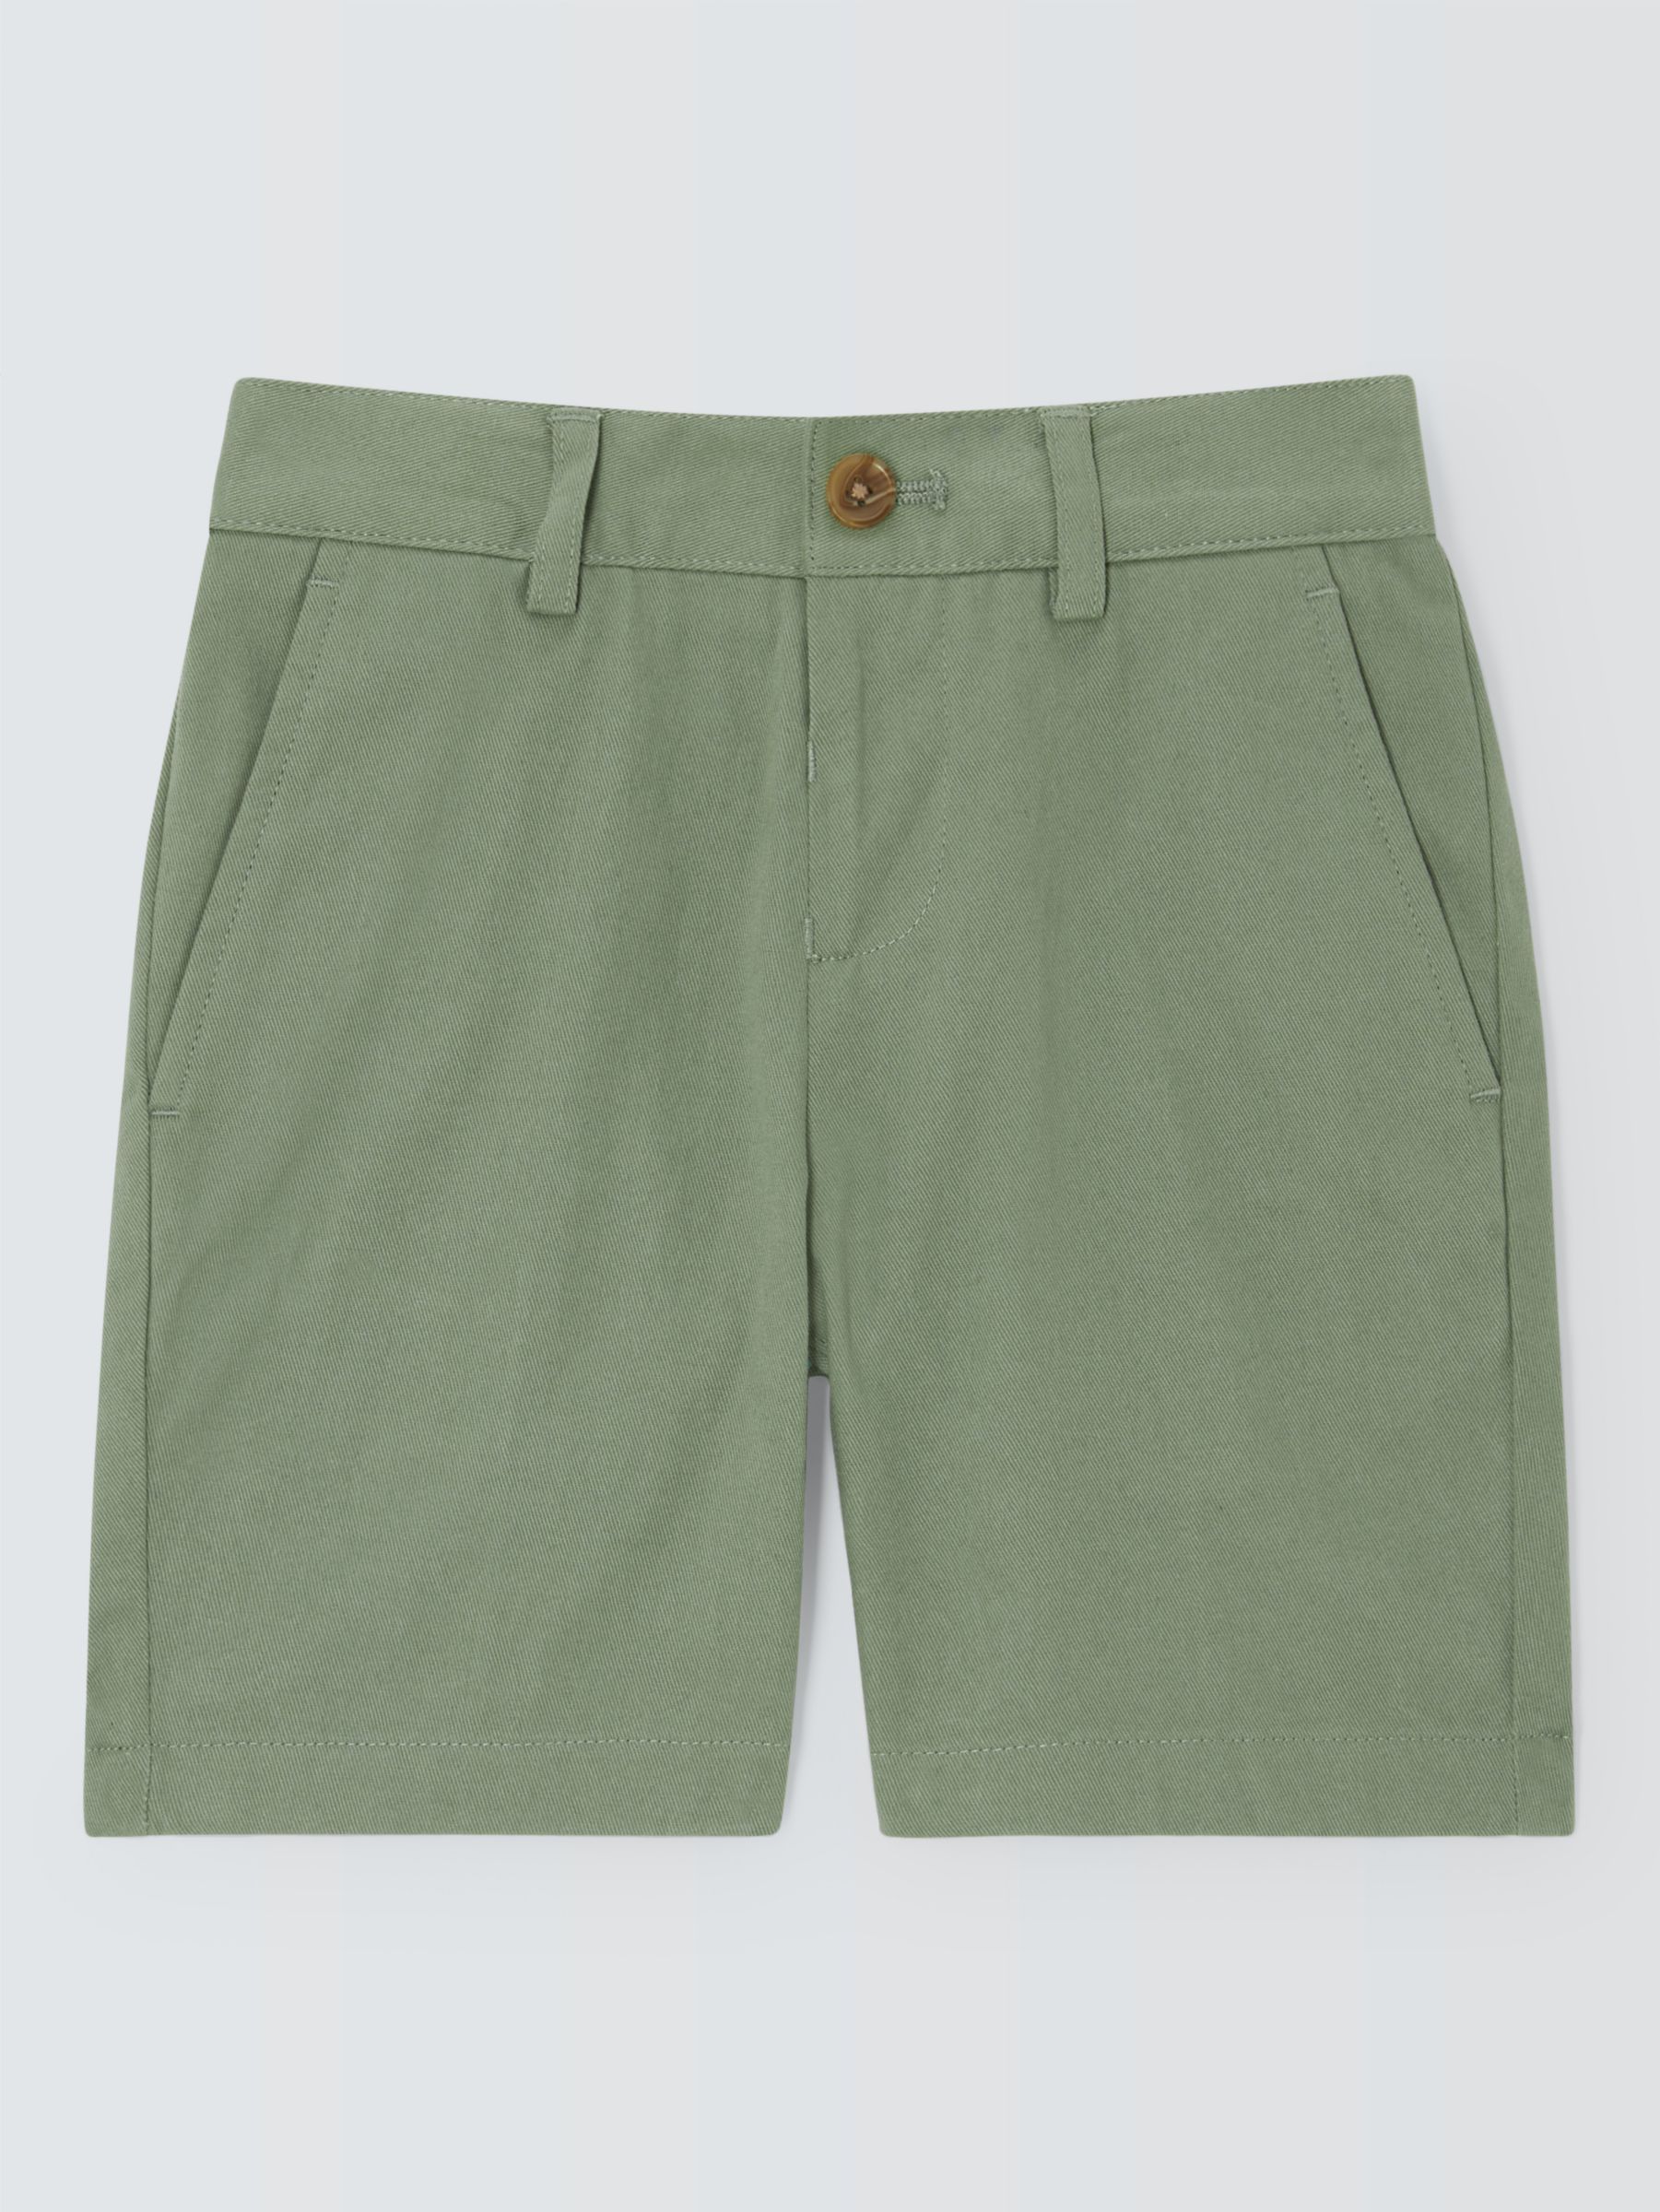 John Lewis Heirloom Collection Kids' Chino Shorts, Green, 13 years